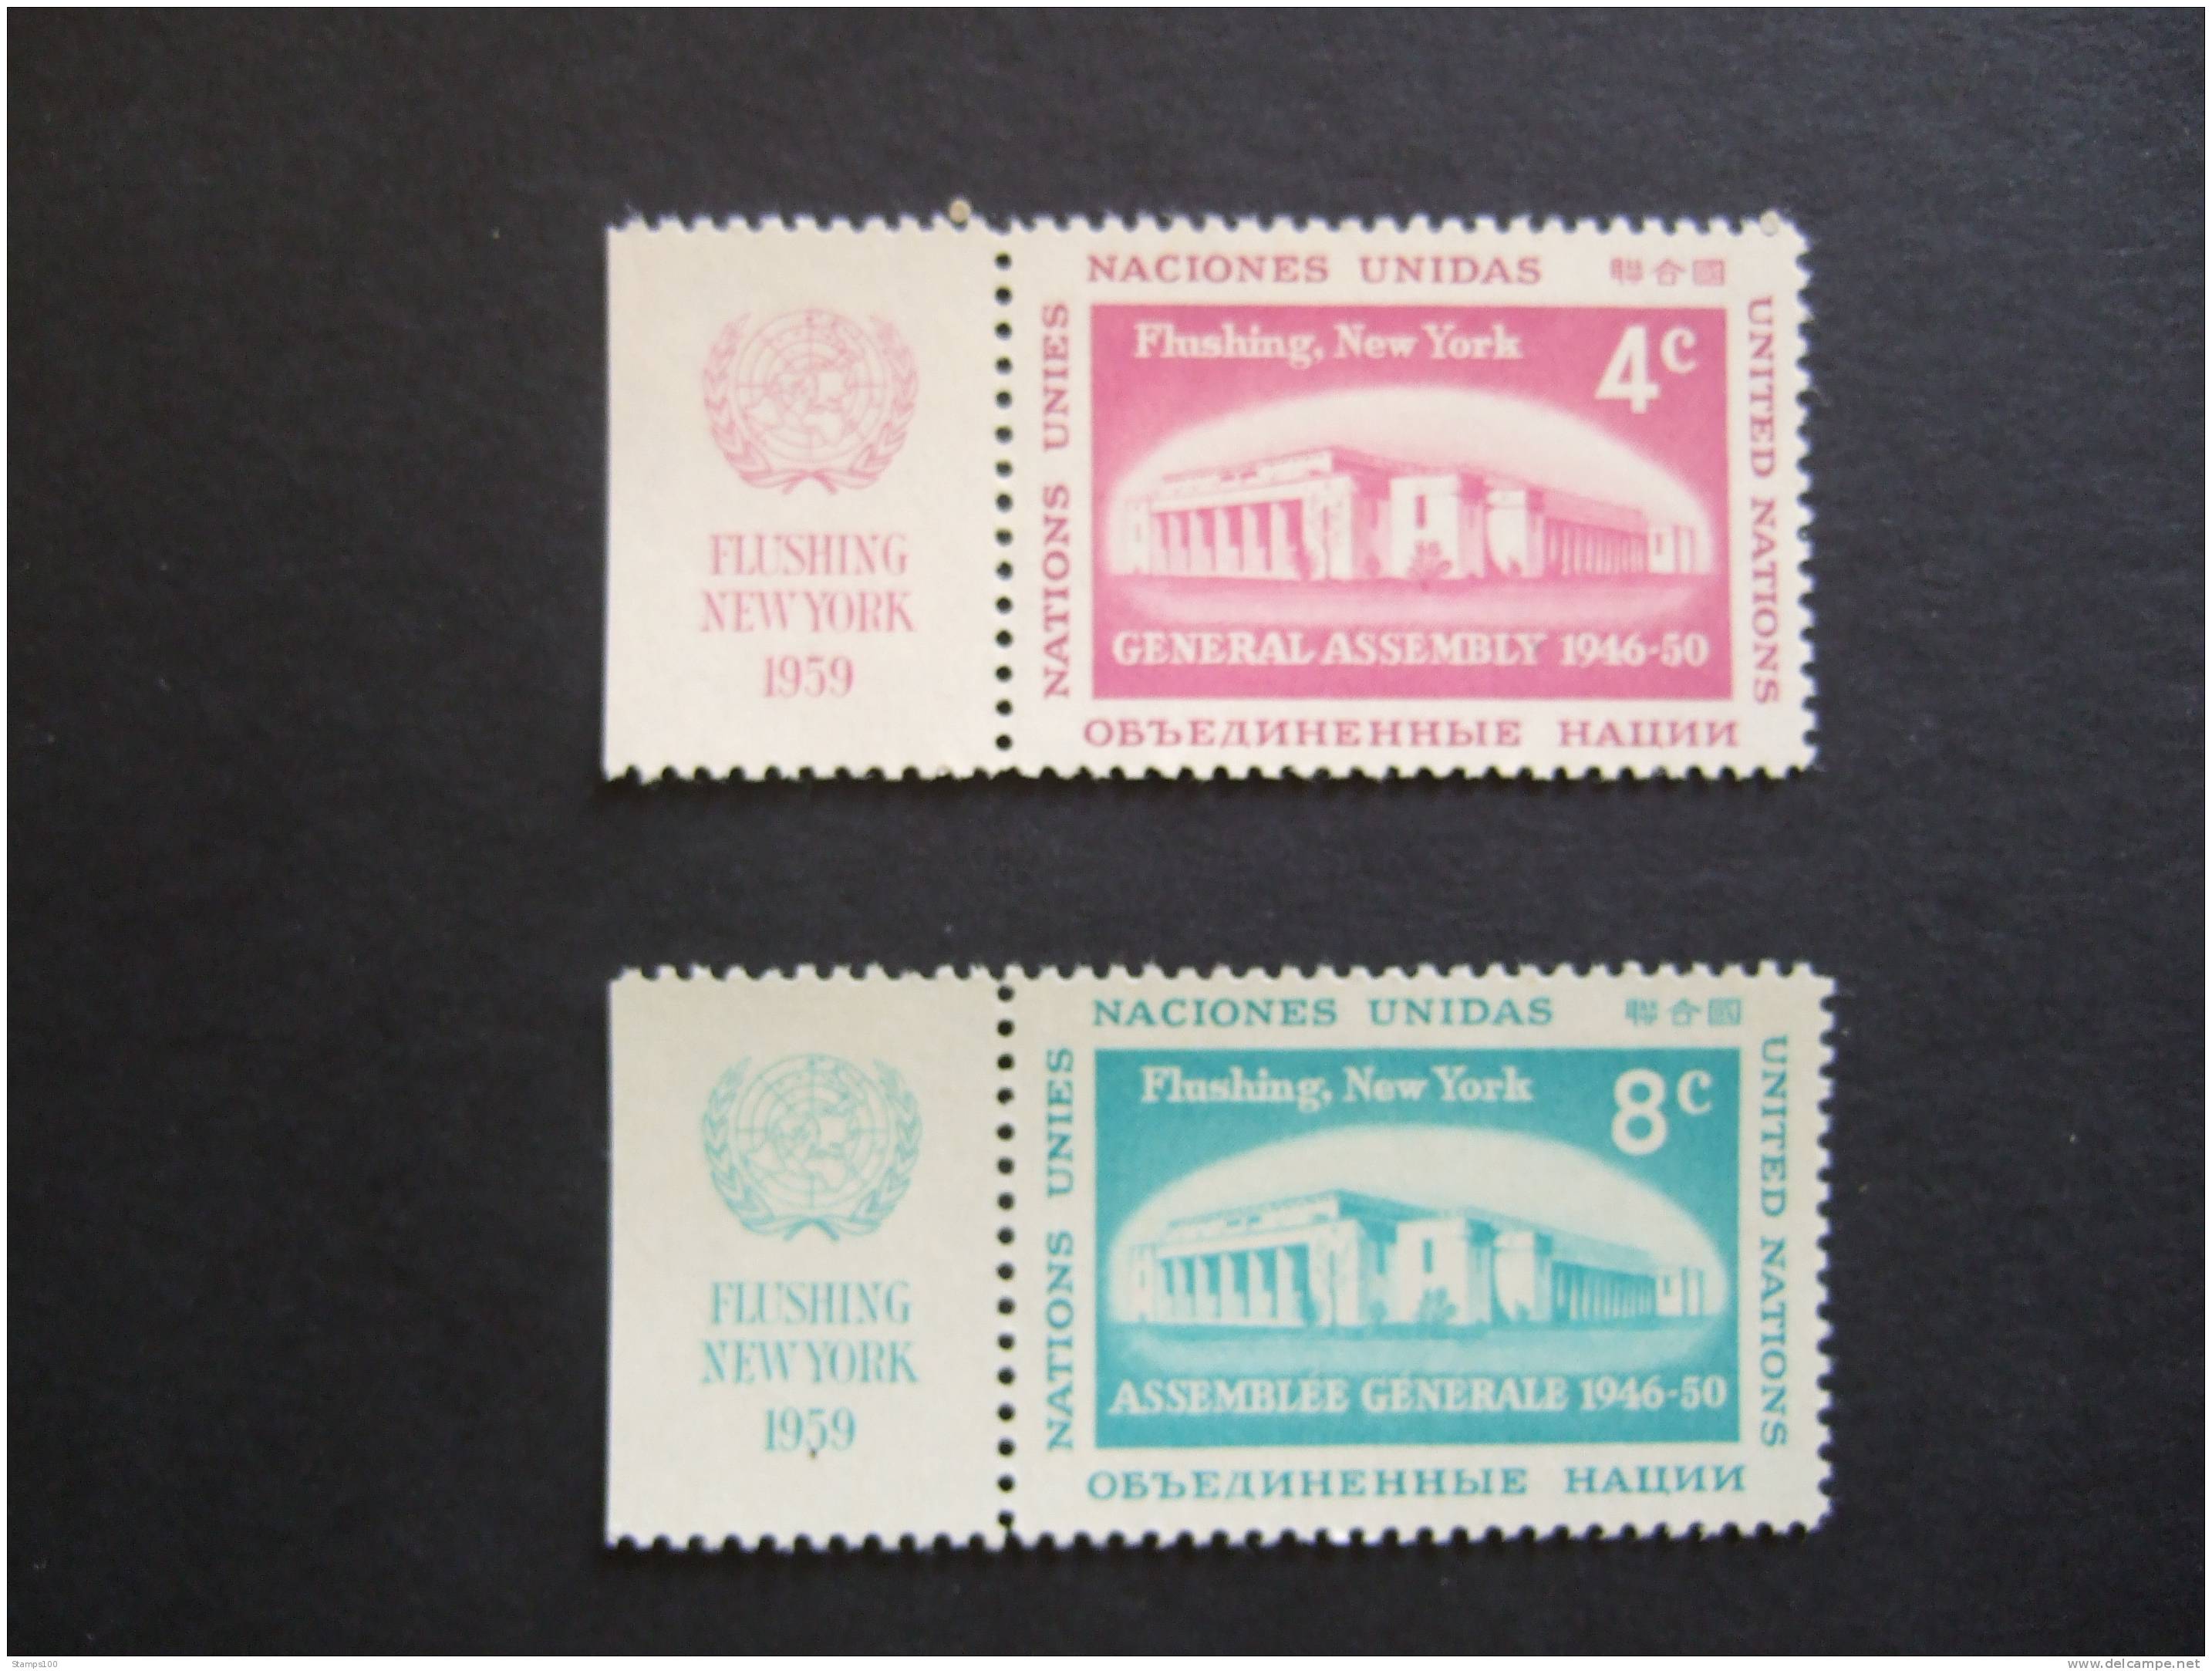 UNITED NATIONS NEW YORK, 1959,  Yv 69-70, WITH UN LOGO, MNH**, (P39-025) - Unused Stamps